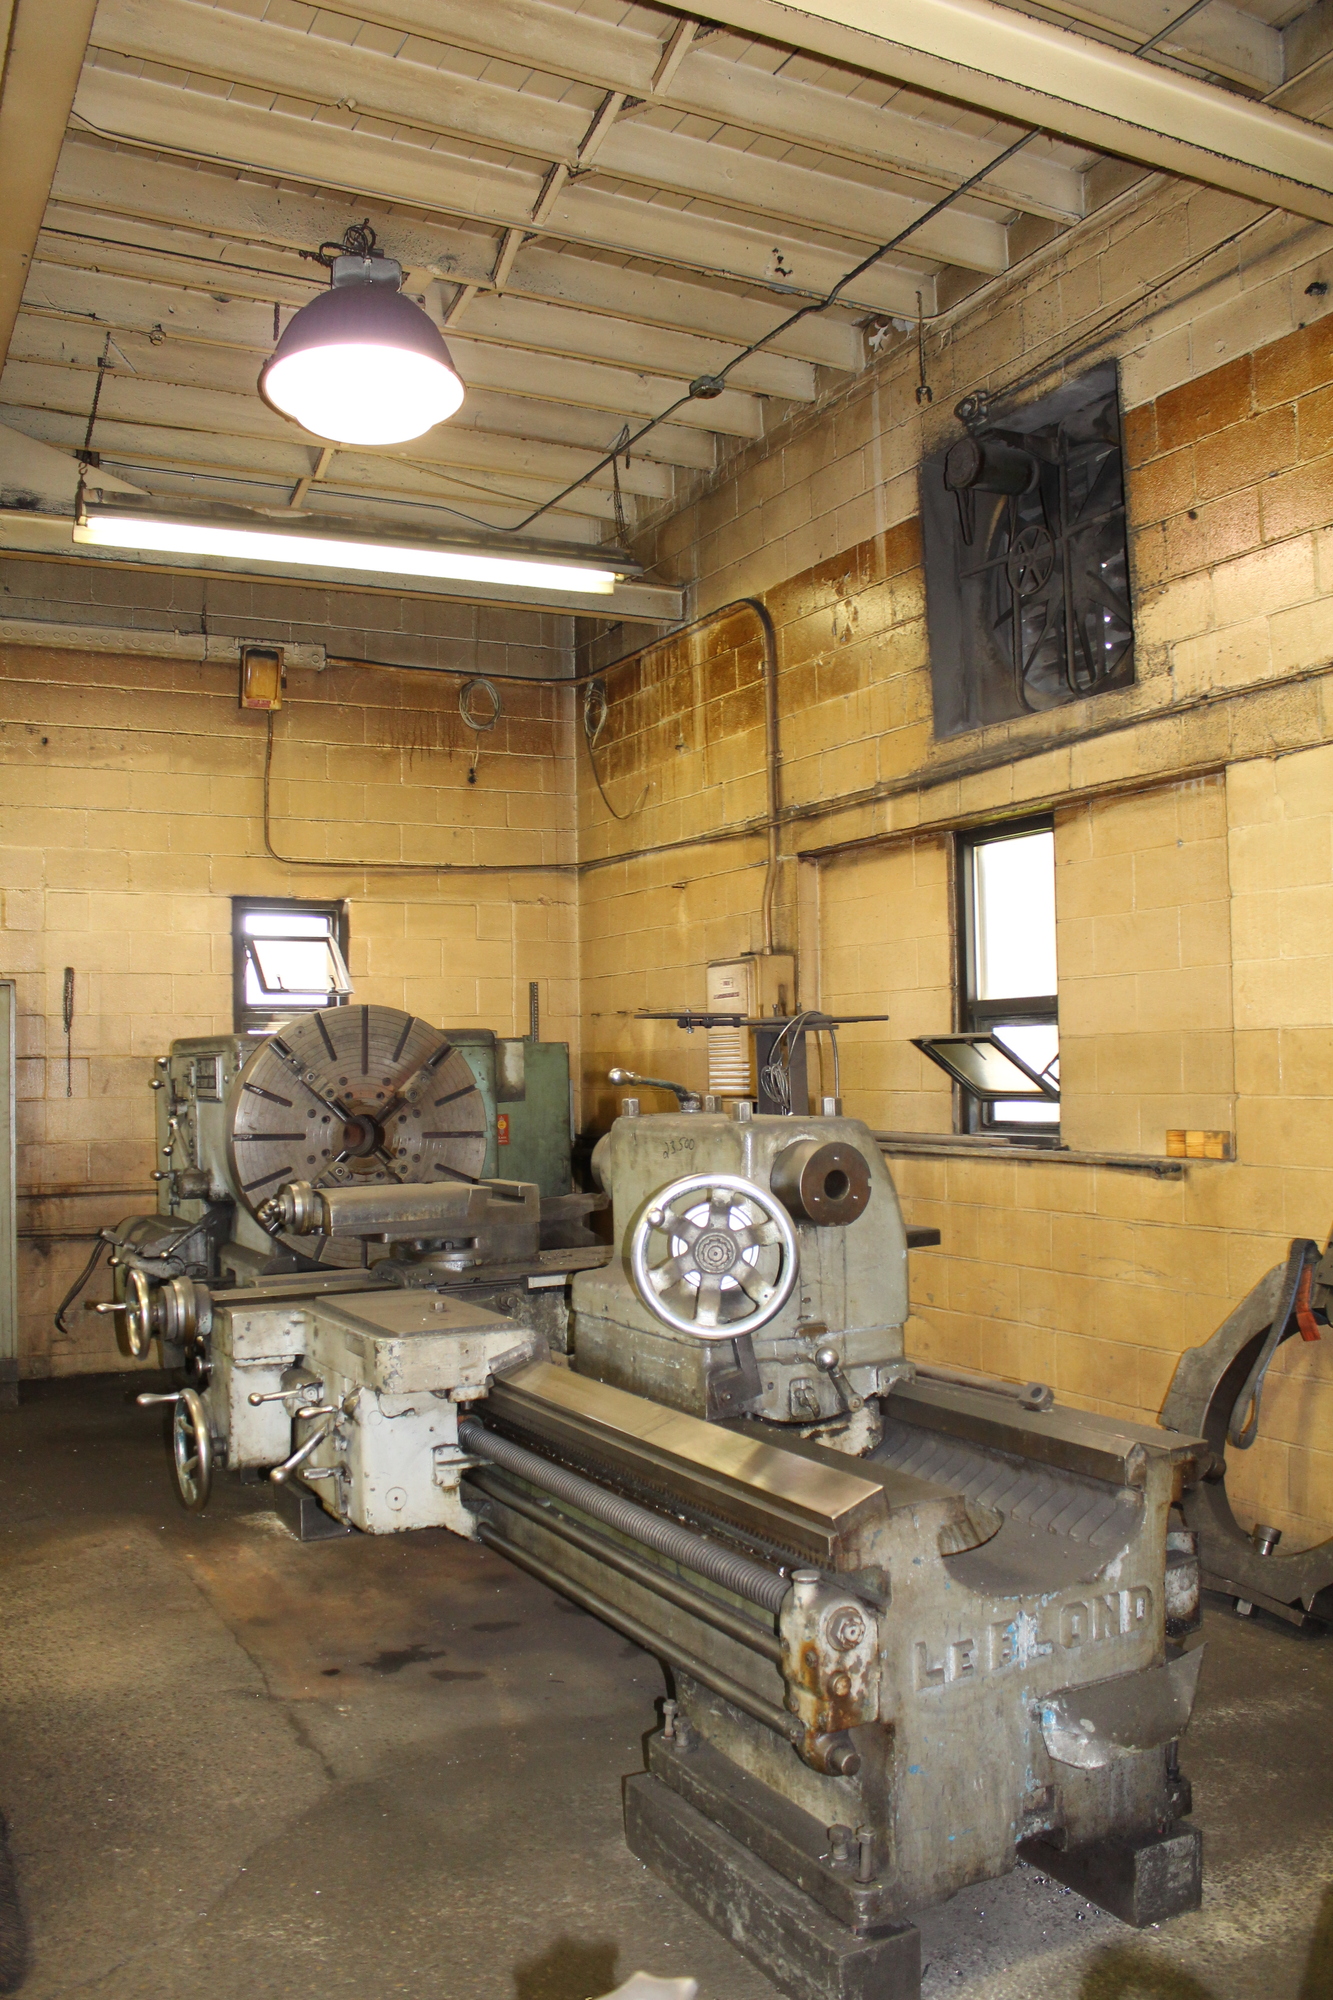 Leblonde 32" Heavy Duty CNC Lathes | Levy Recovery Group